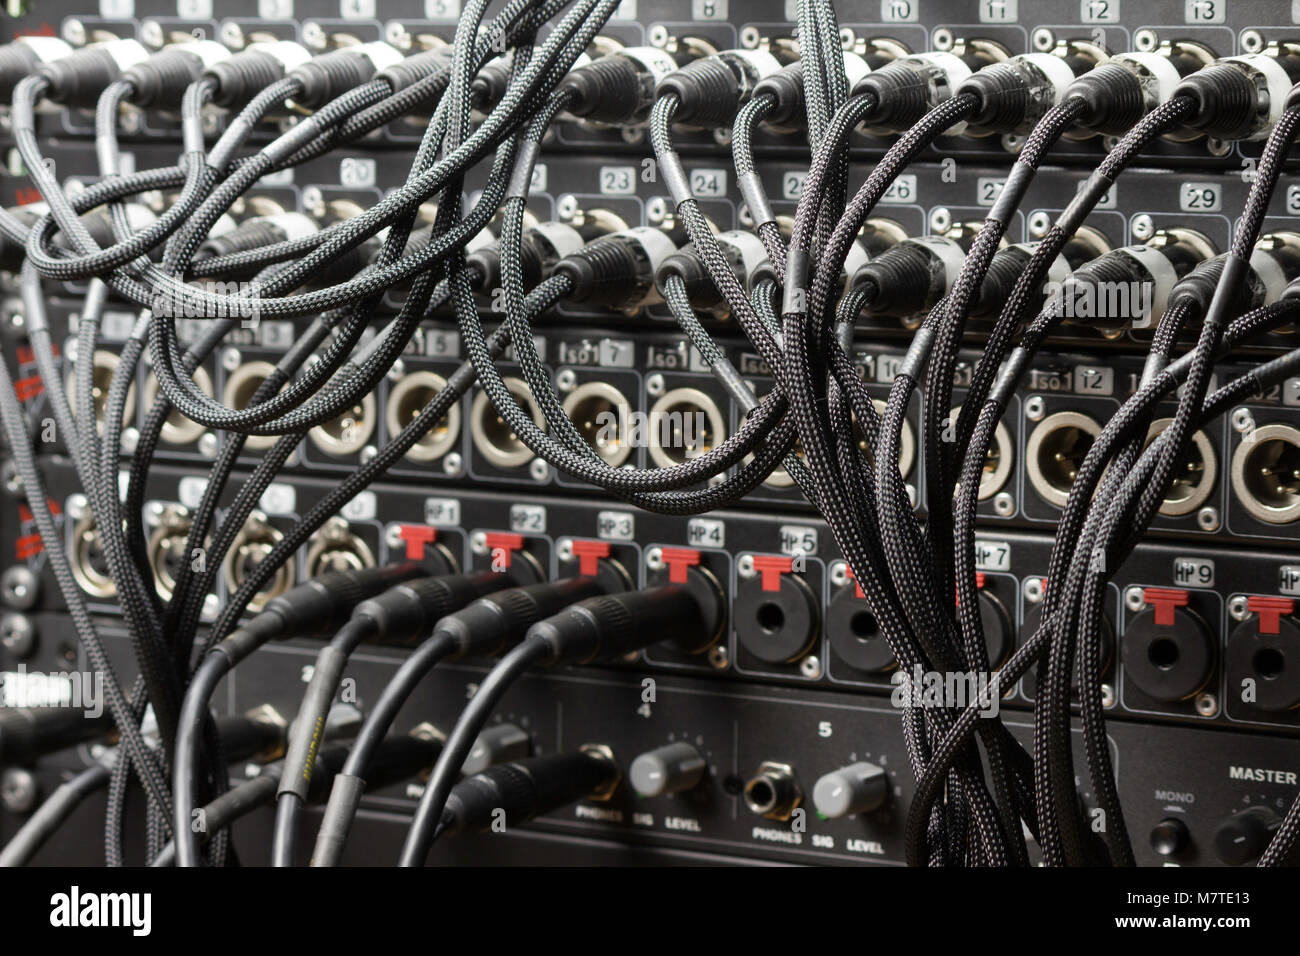 A bunch or cords that all play an important role in music production Stock Photo